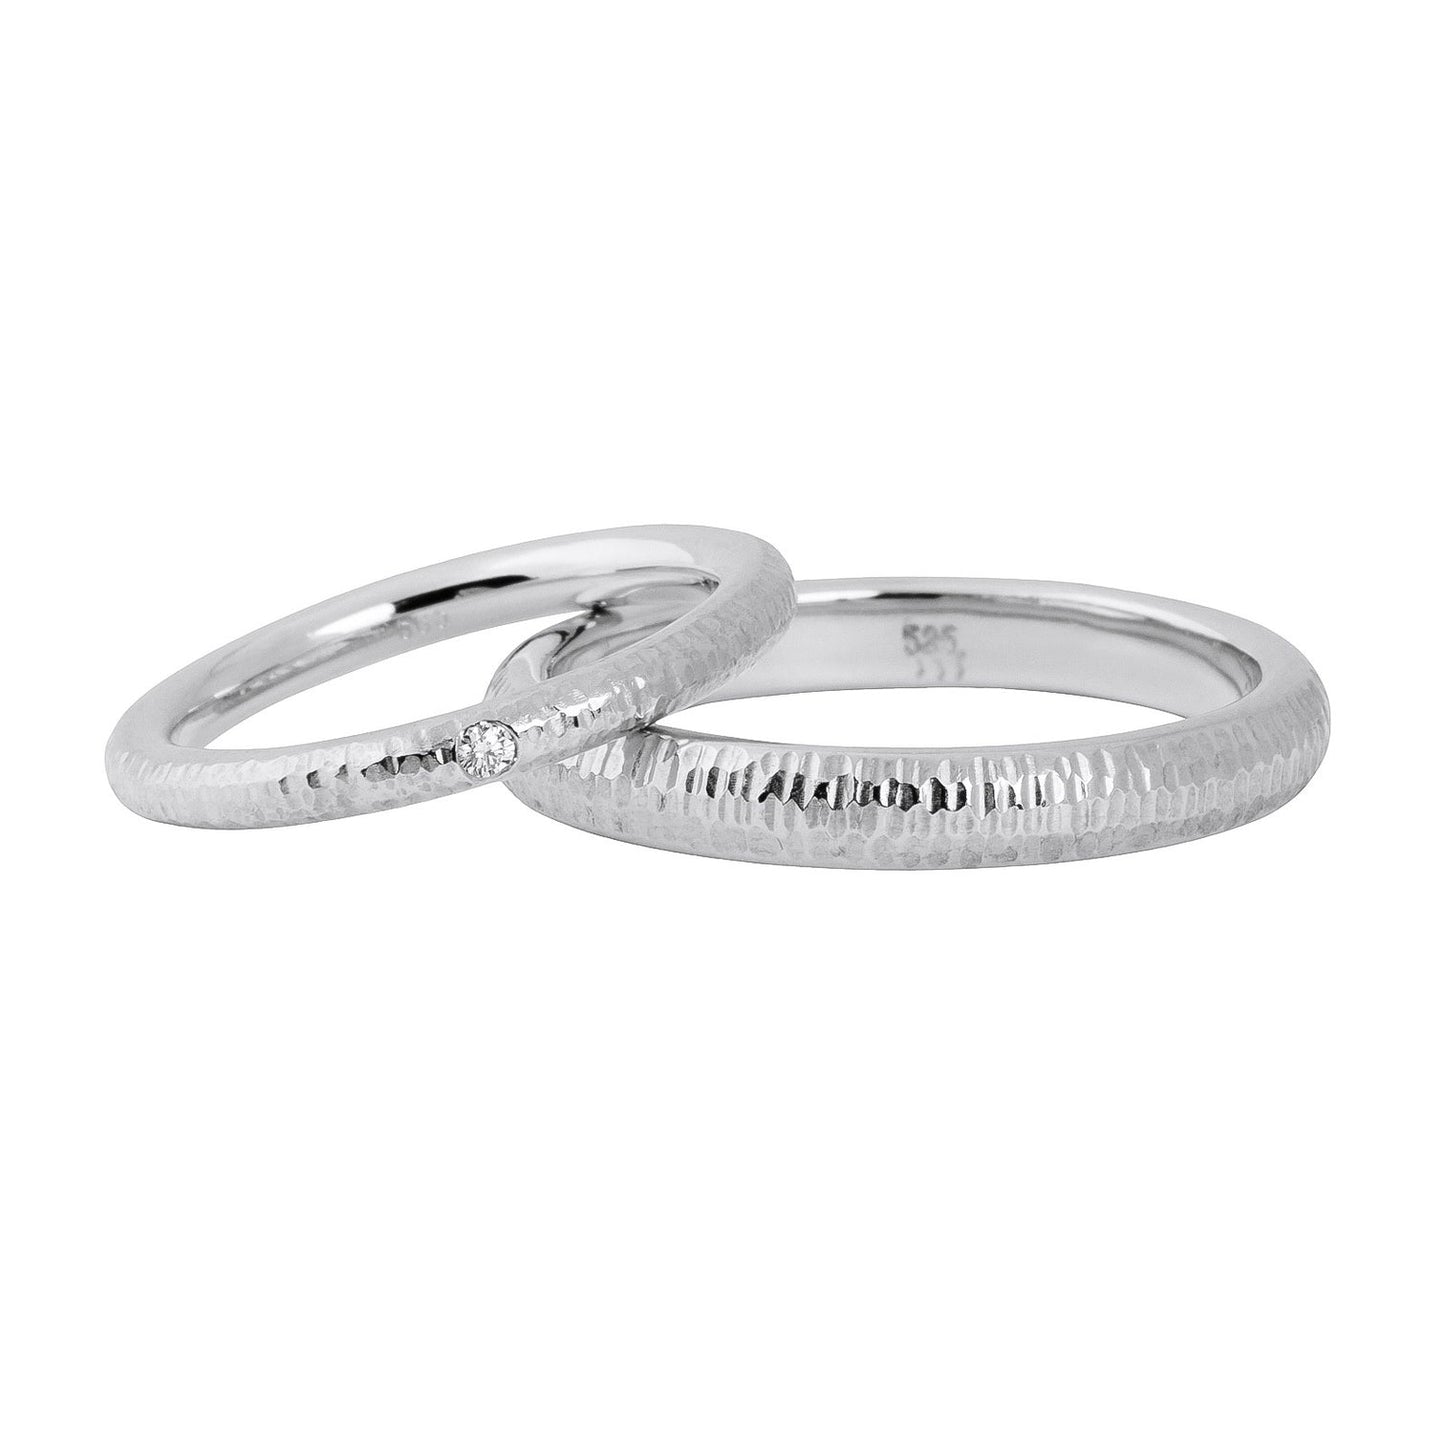 Classy 14 kt white gold wedding ring, front view.